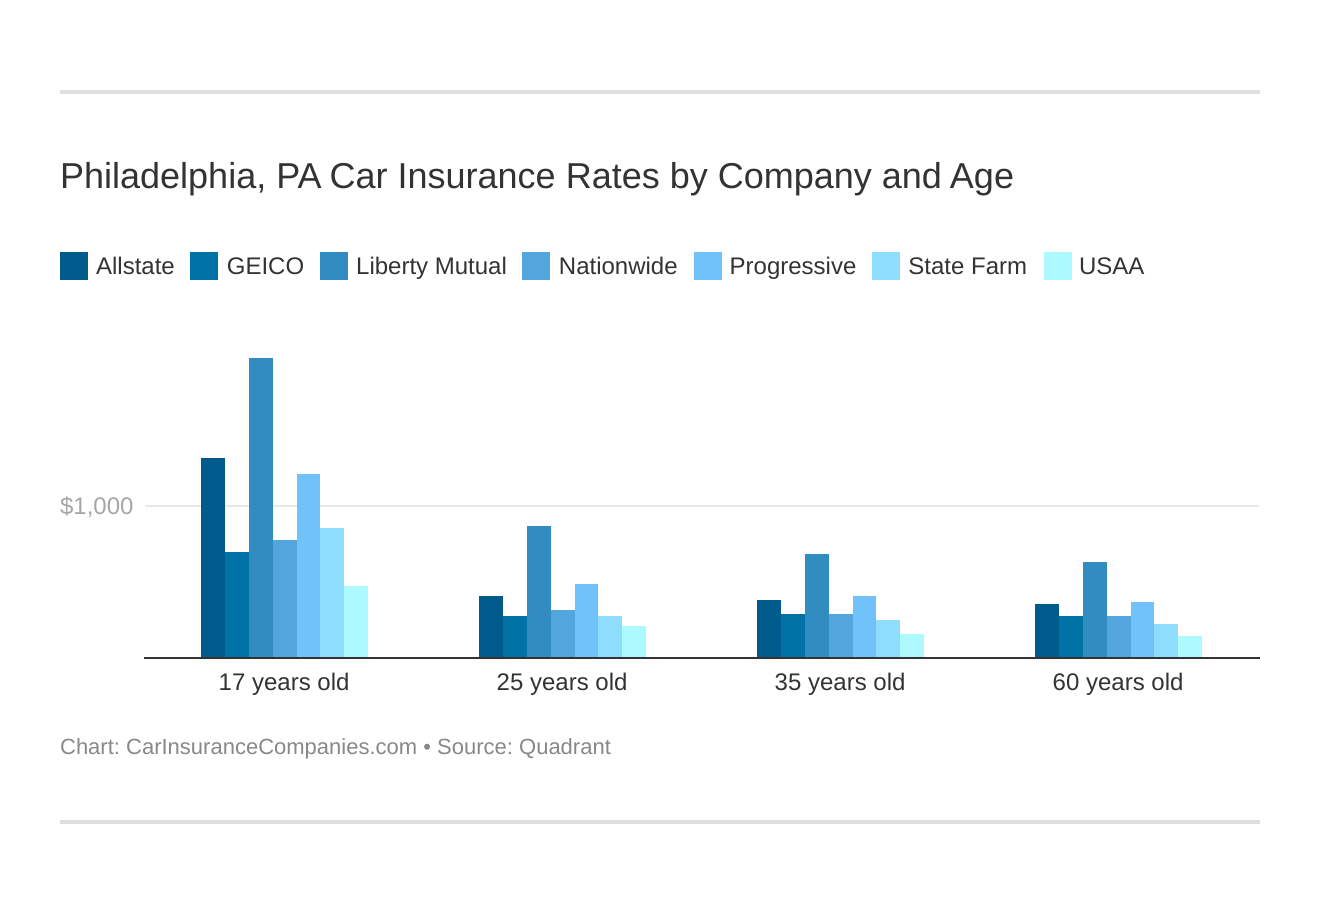 Philadelphia, PA Car Insurance Rates by Company and Age